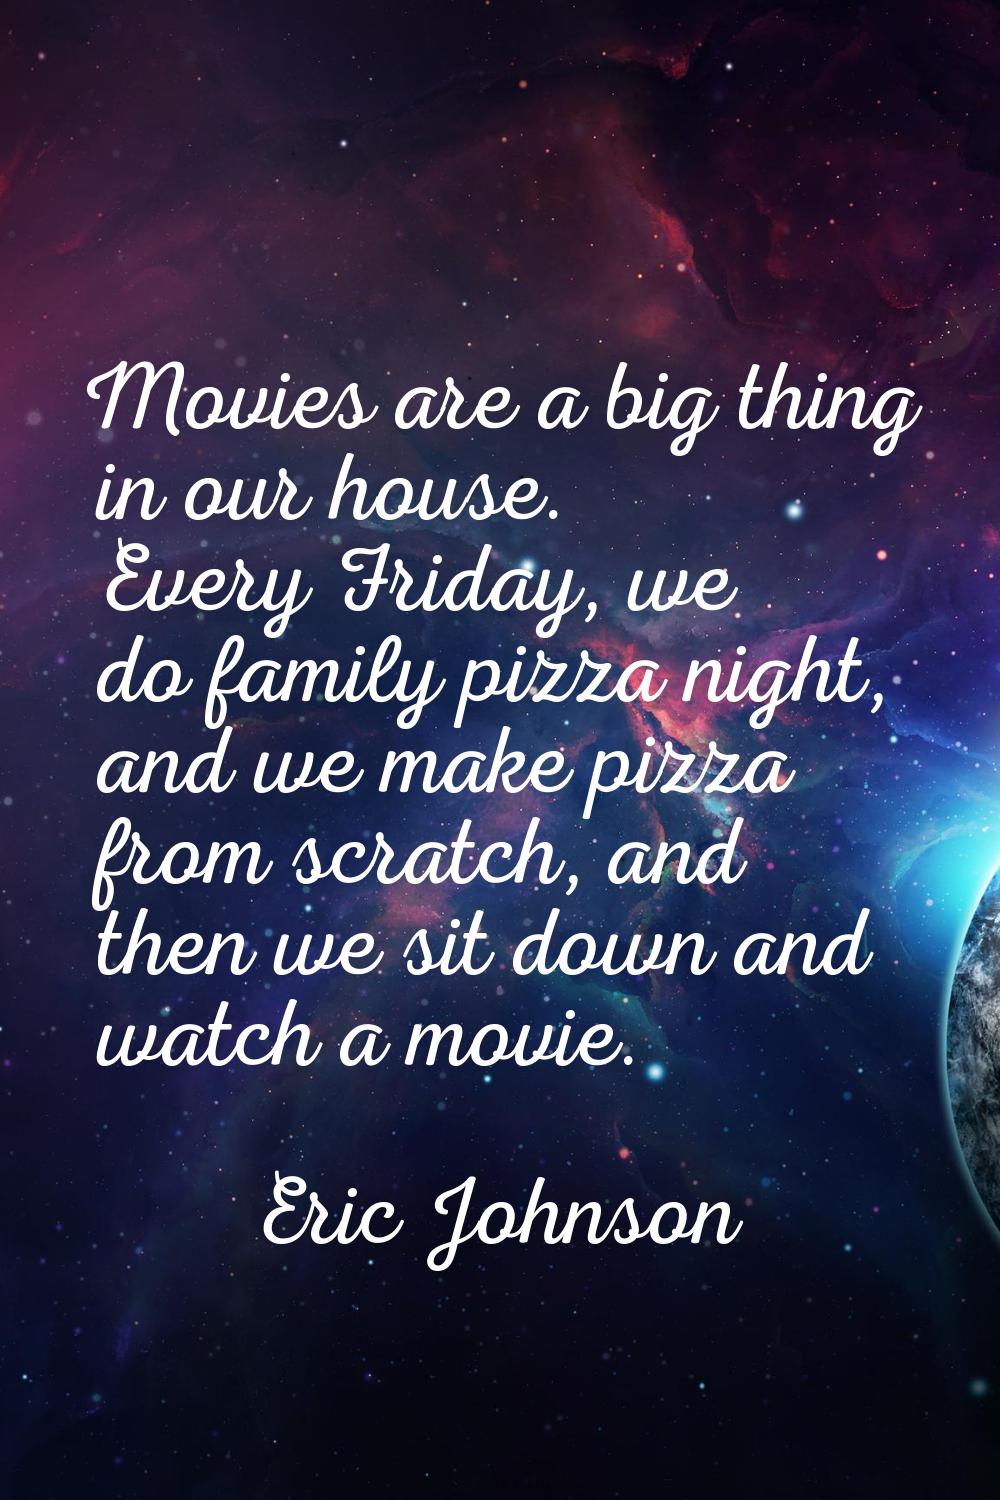 Movies are a big thing in our house. Every Friday, we do family pizza night, and we make pizza from